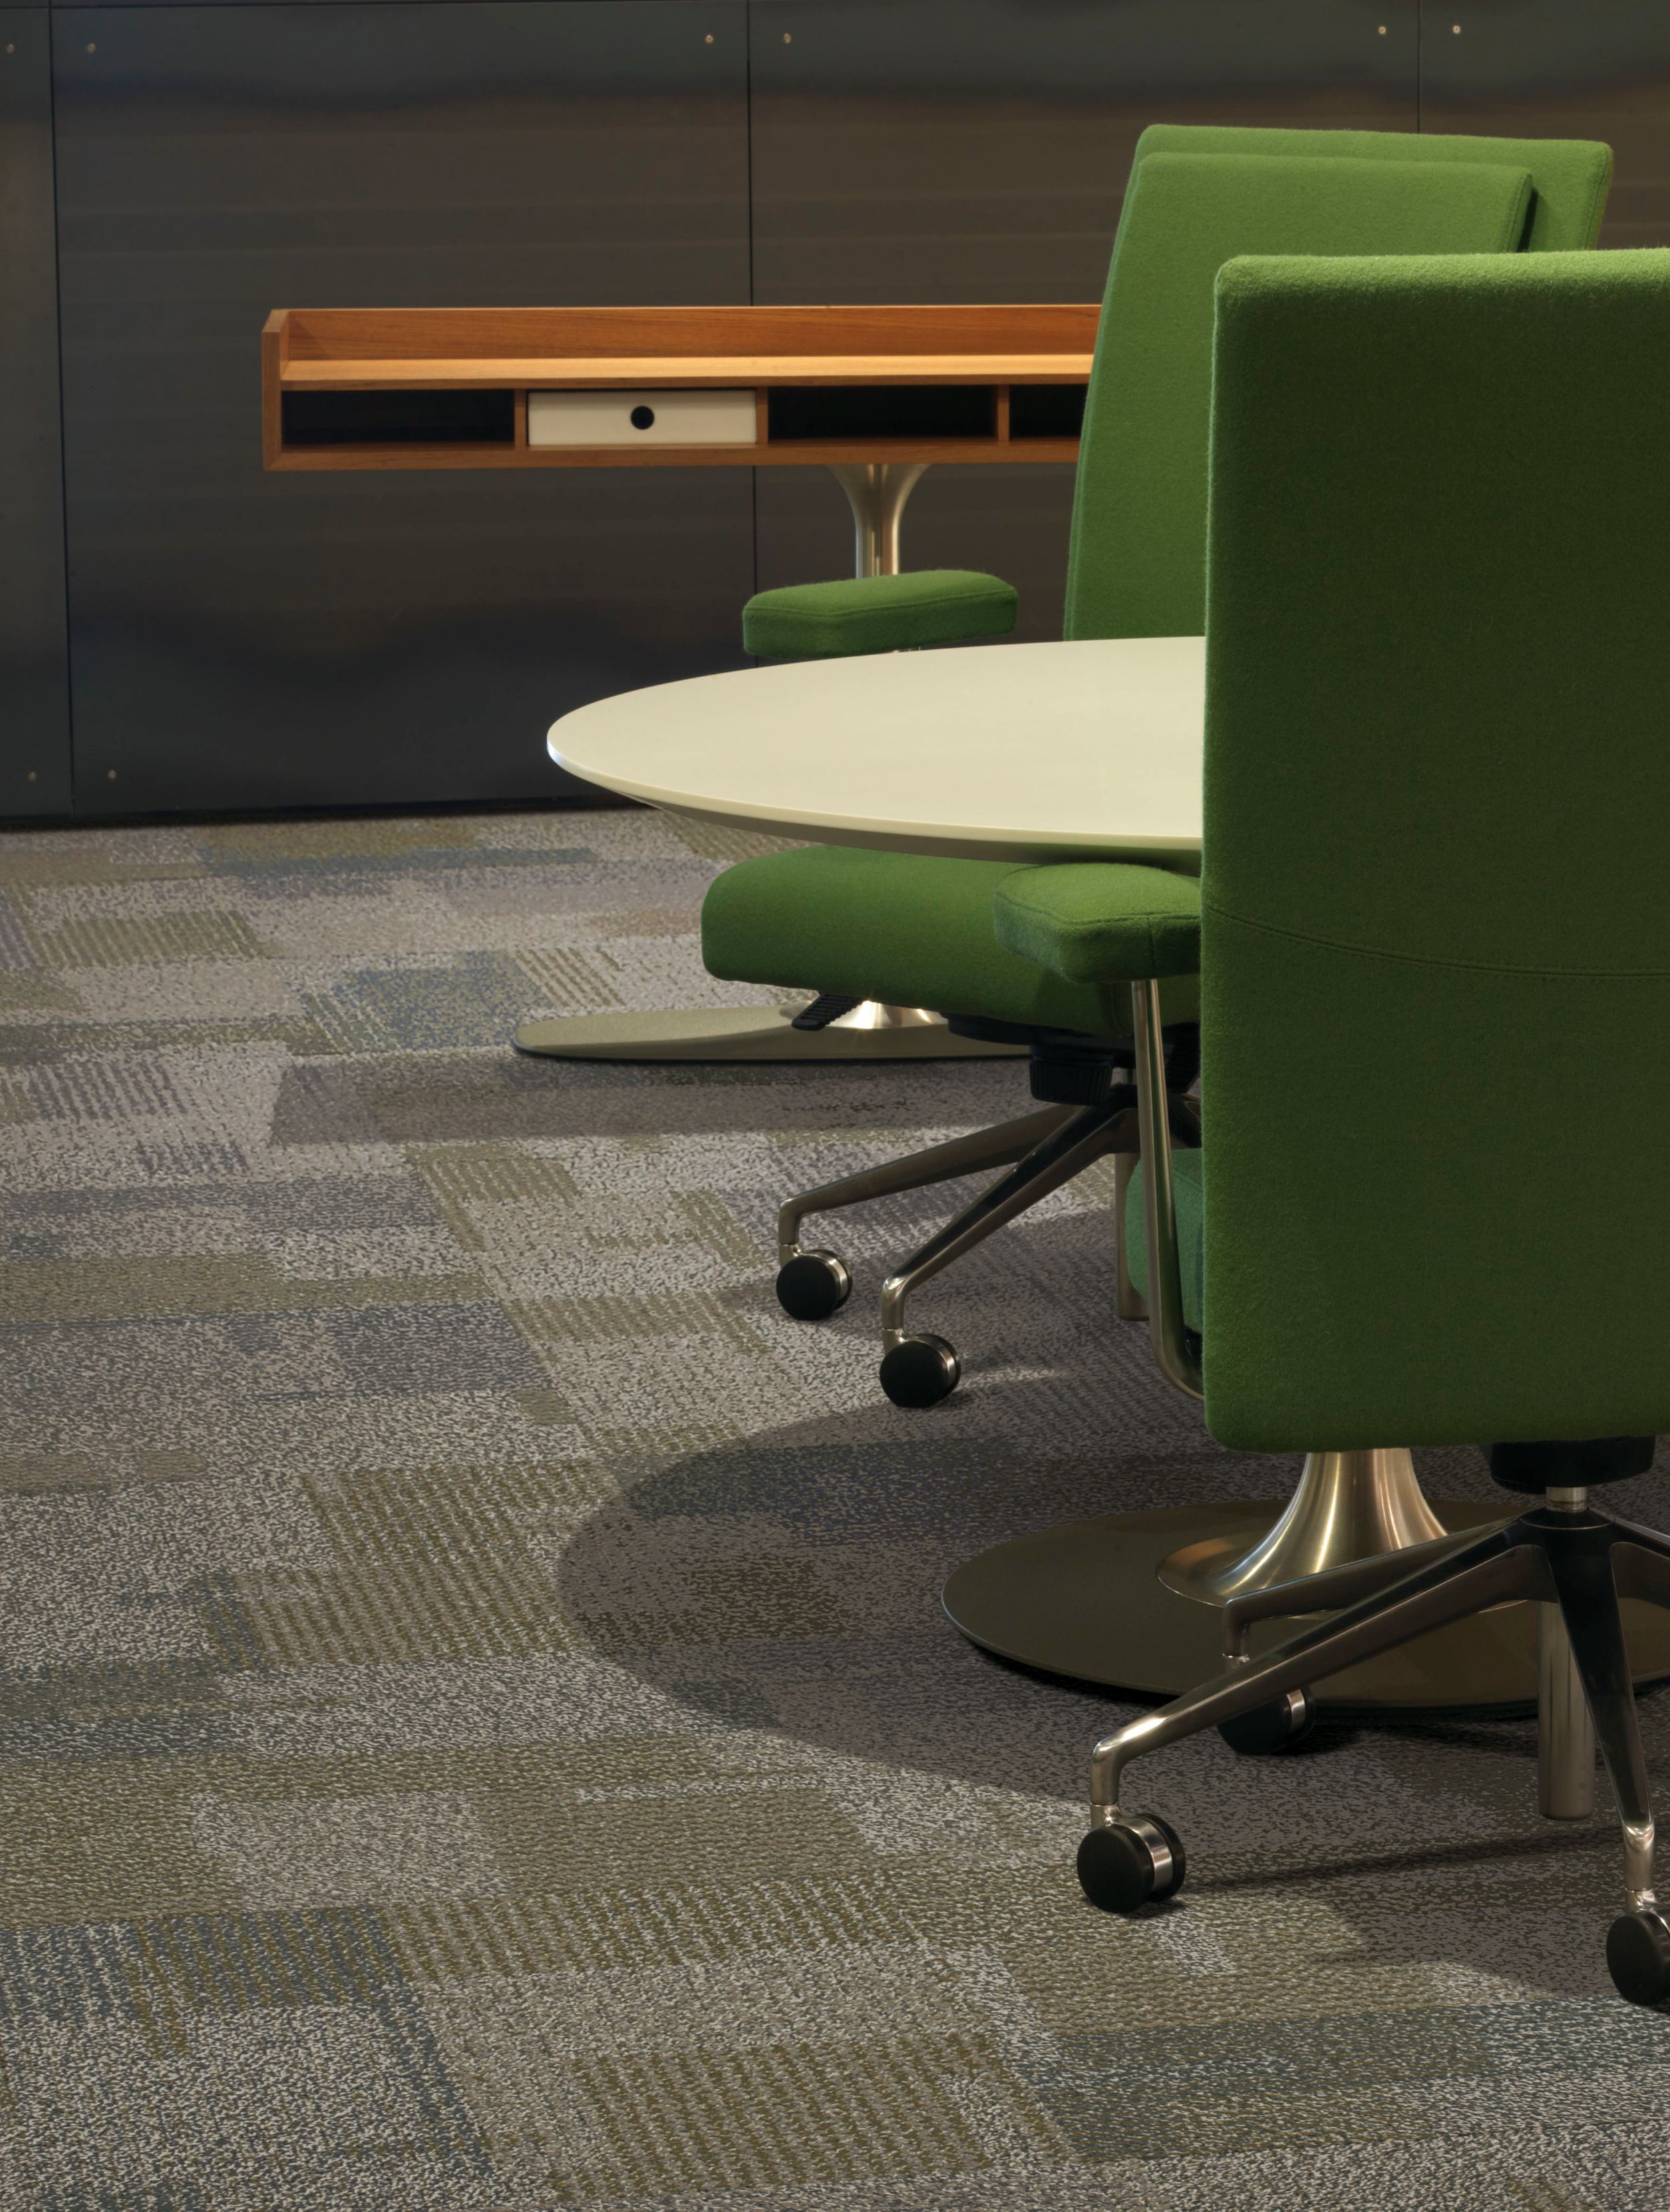 Interface Entropy carpet tile in room with green chairs and wooden shelf in background imagen número 4